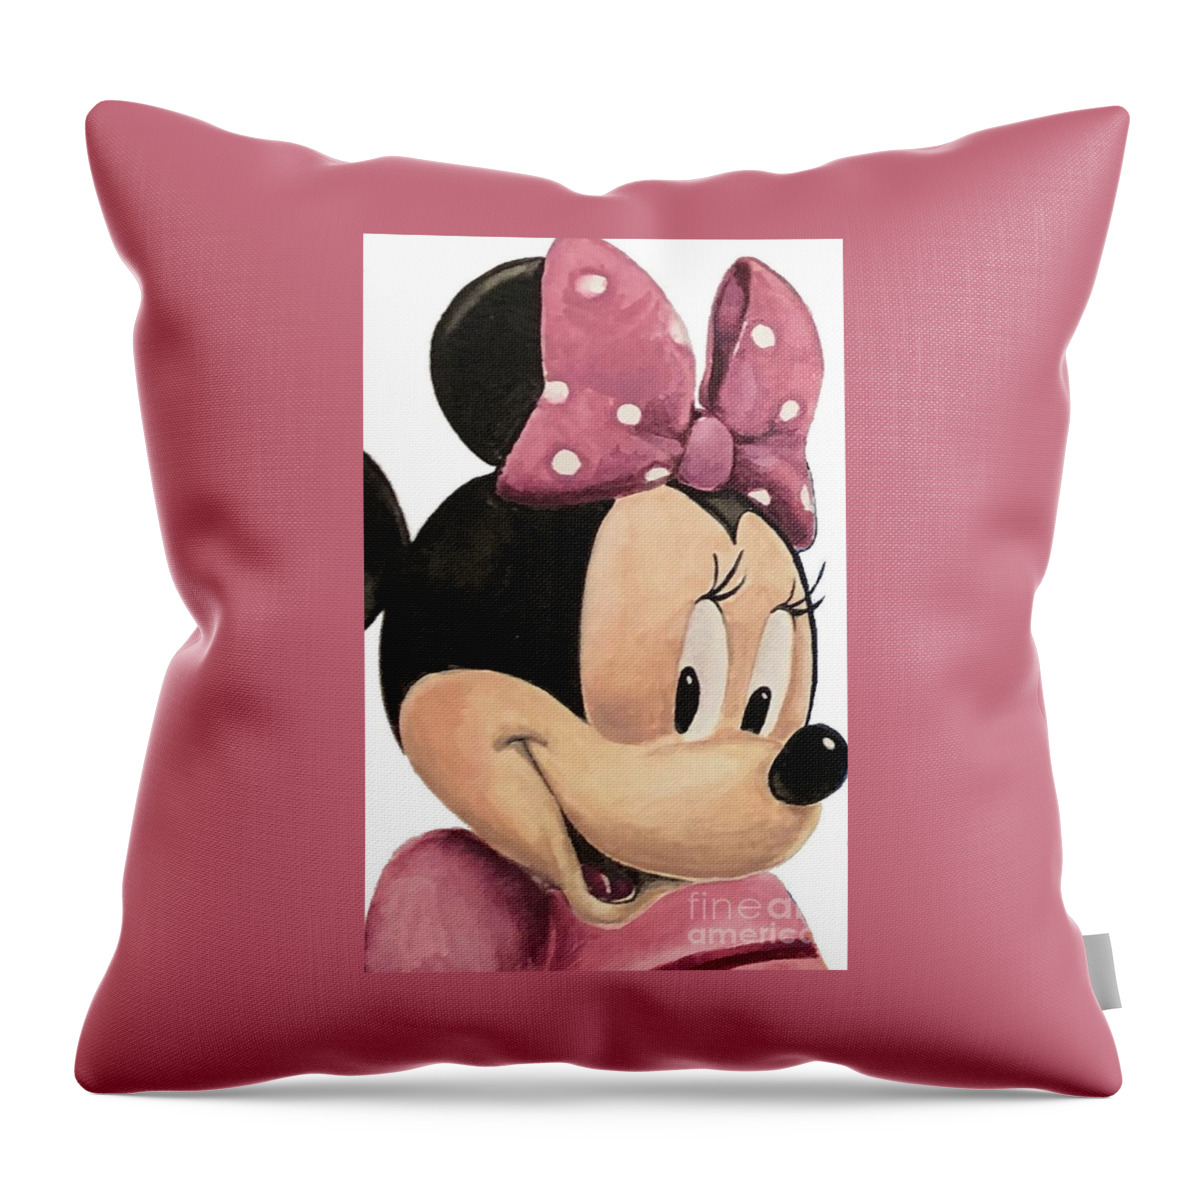 Minnie Mouse Throw Pillow featuring the painting Minnie Mouse - Disney by Tamir Barkan